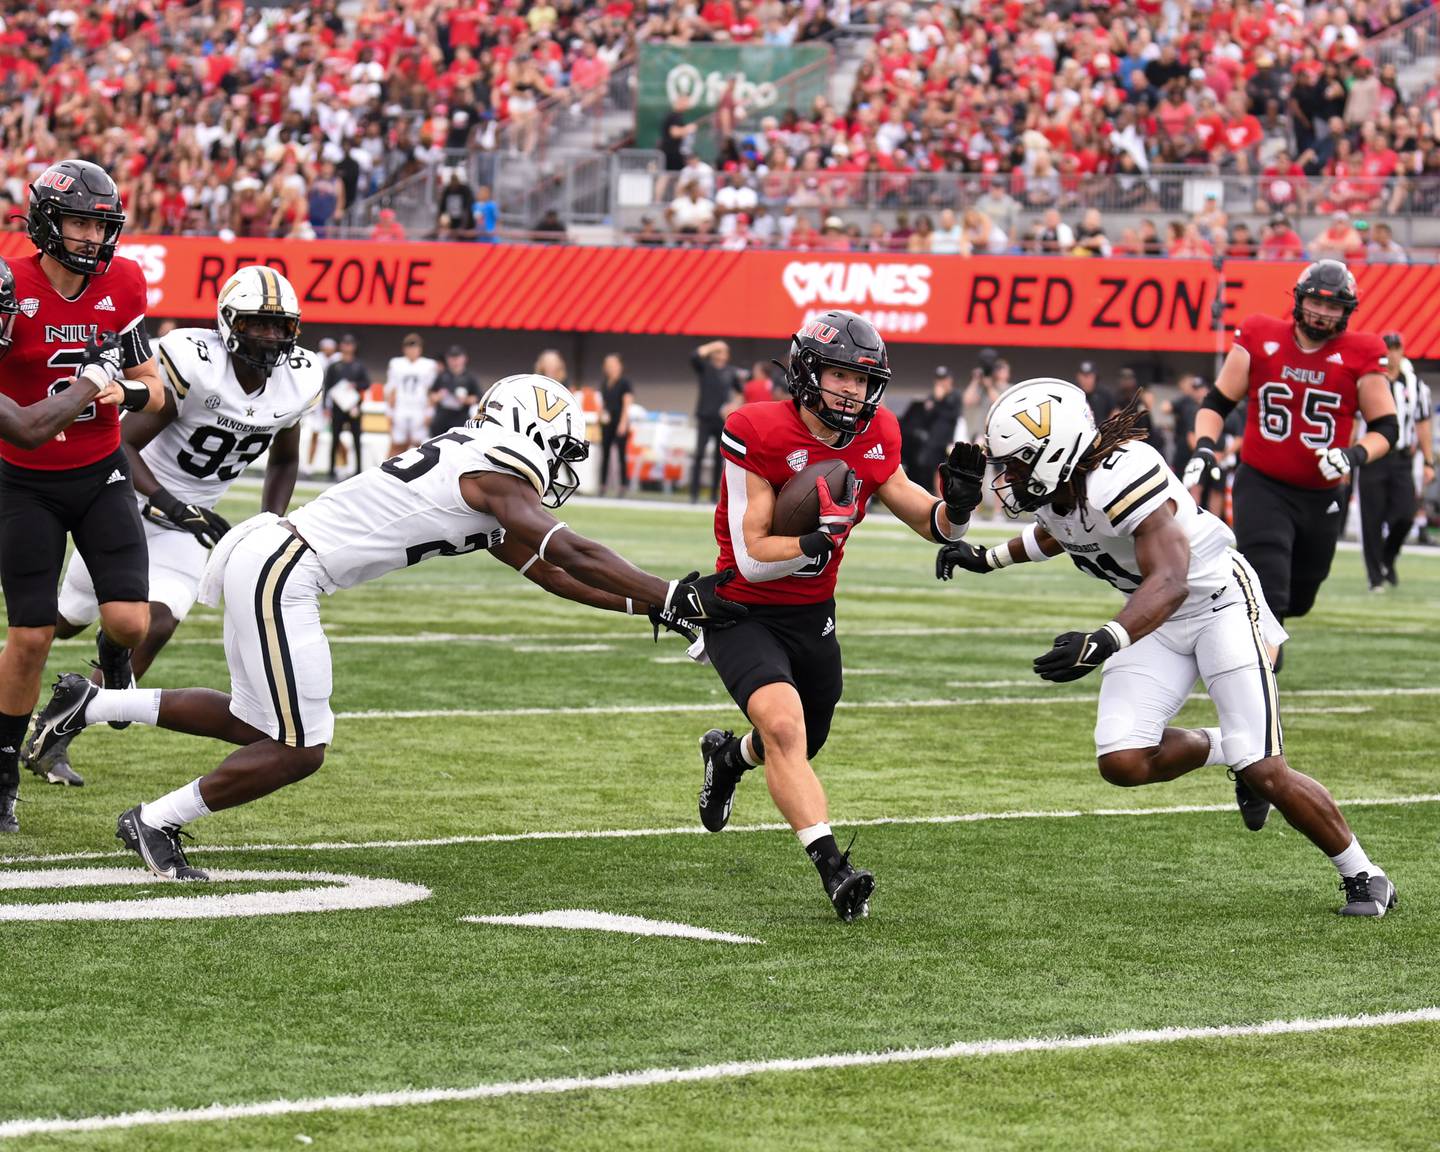 Northern Illinois Kacper Rutkiewicz (8) runs the ball in the second quarter before being brought down by Vanderbilt defenders on Saturday Sep. 17 at Huskie Stadium in DeKalb.